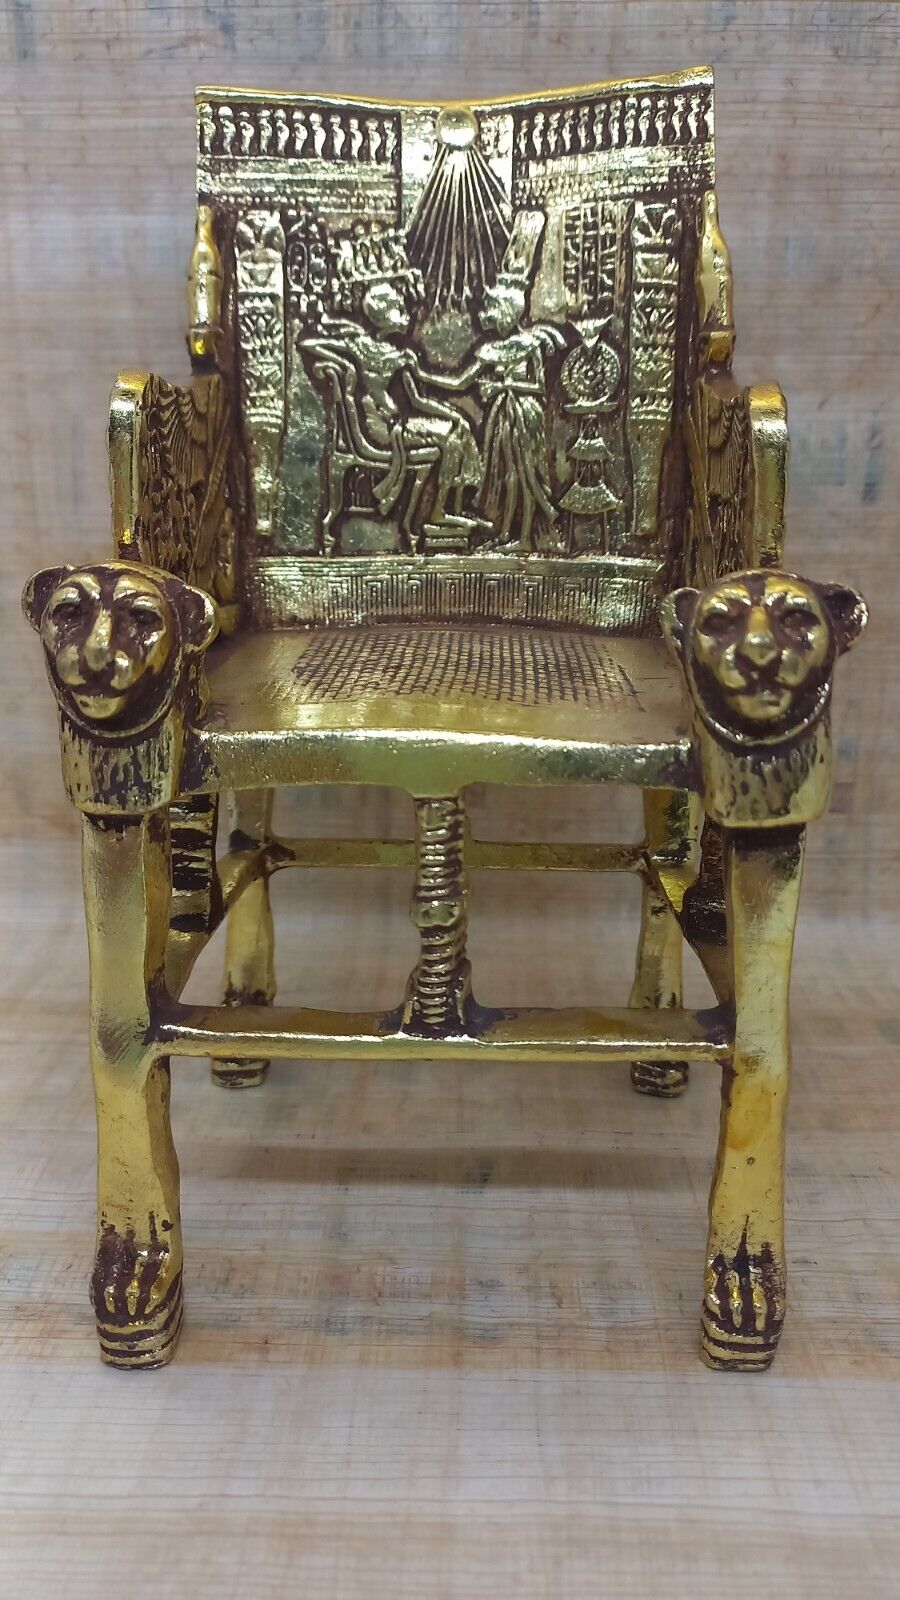 ANCIENT THRONE CHAIR OF PHARAONIC KING TUTANKHAMUN FROM EGYPTIAN ANTIQUITIES BC